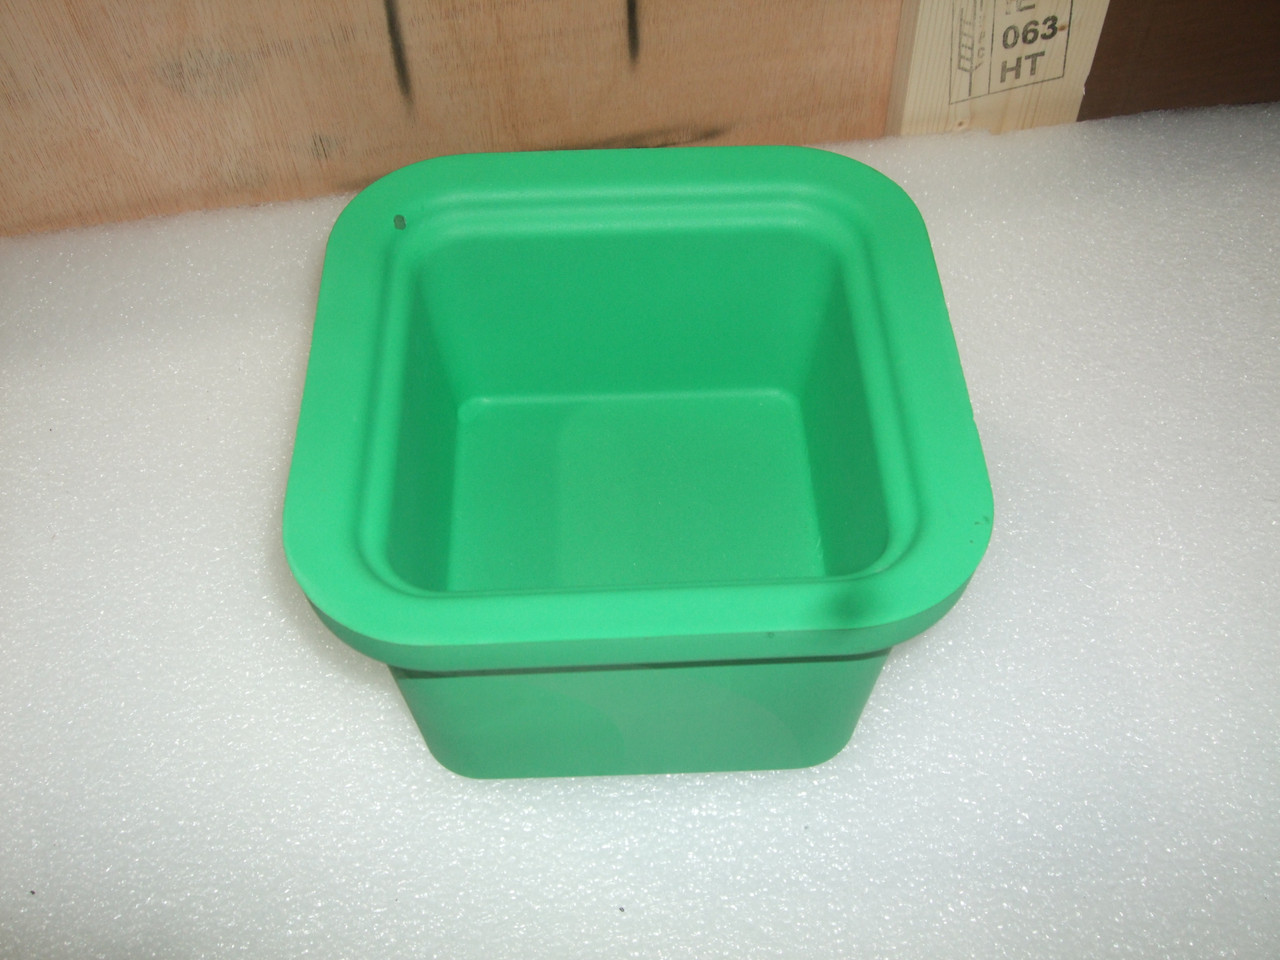 Corp Magic 50-136-7772 Touch 2 Ice Pan, Green, 1 Liter Capacity